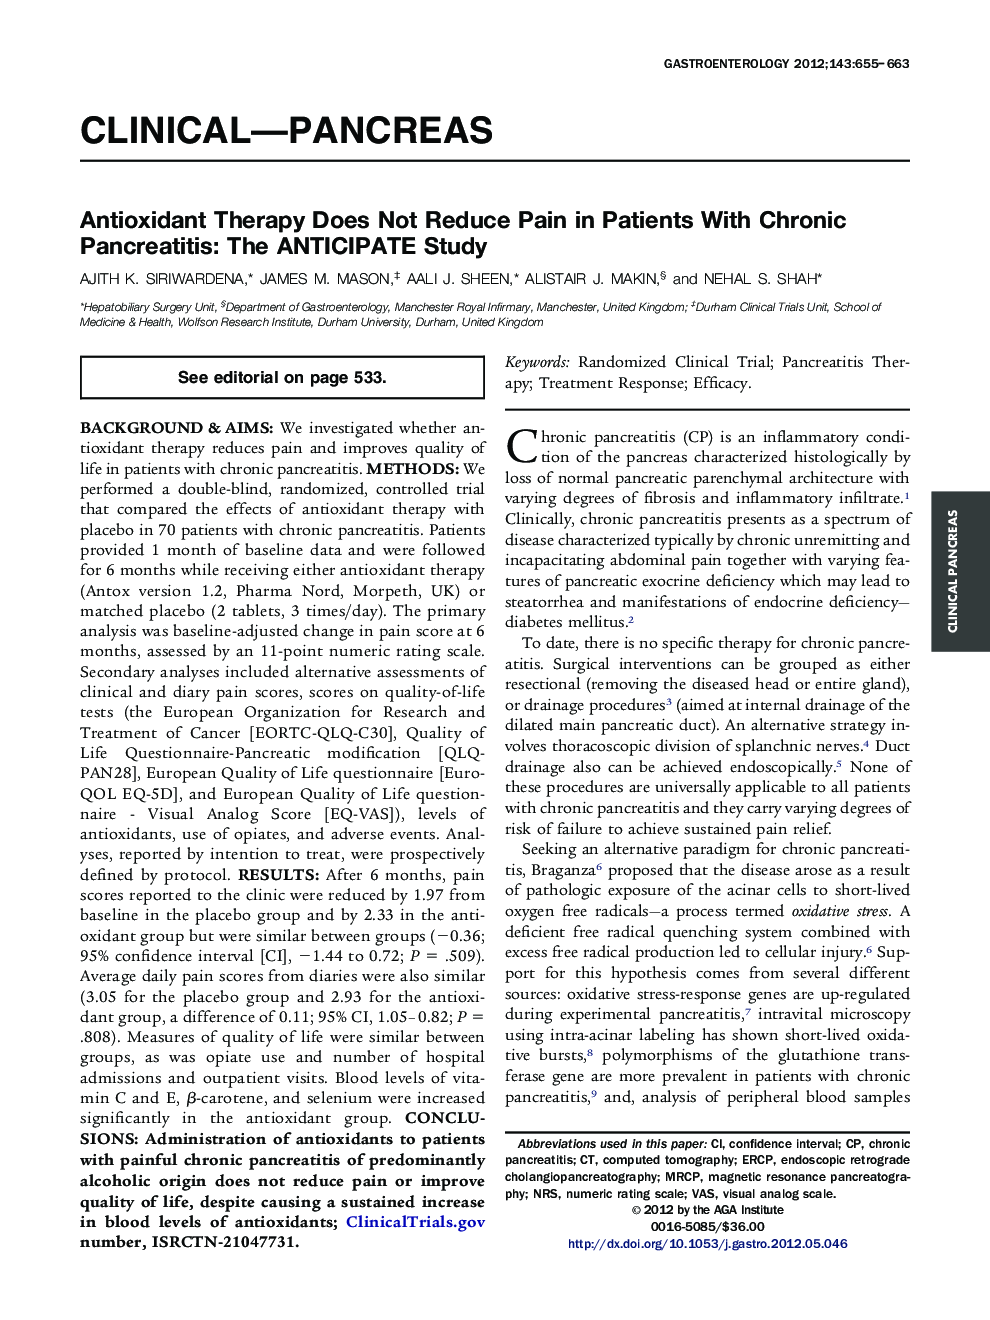 Antioxidant Therapy Does Not Reduce Pain in Patients With Chronic Pancreatitis: The ANTICIPATE Study